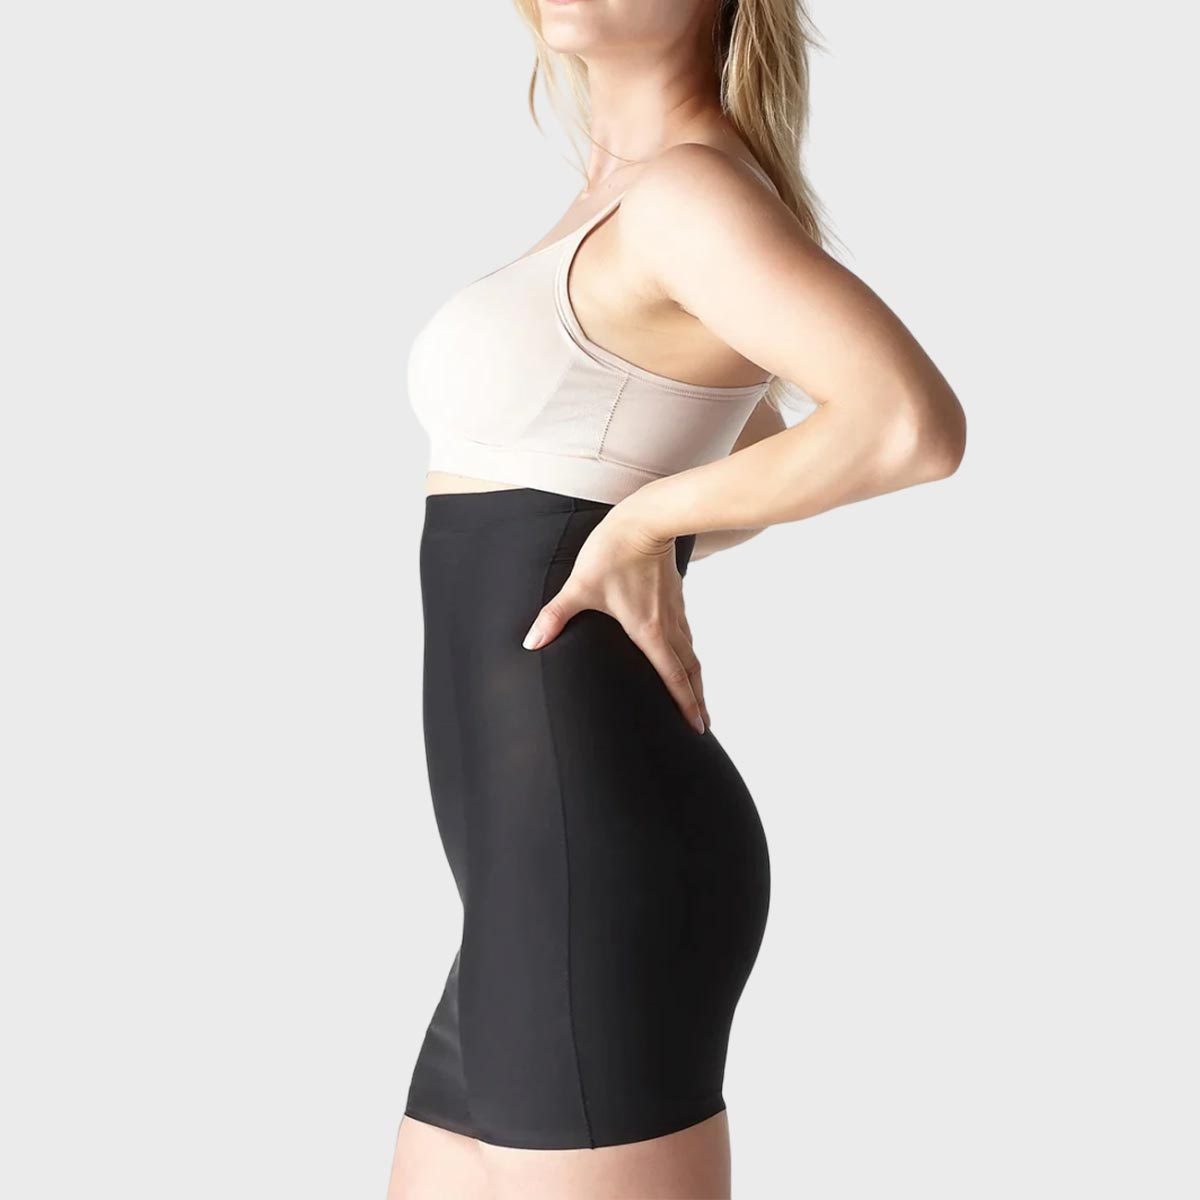 Shapewear maker Spanx tries to loosen up its image